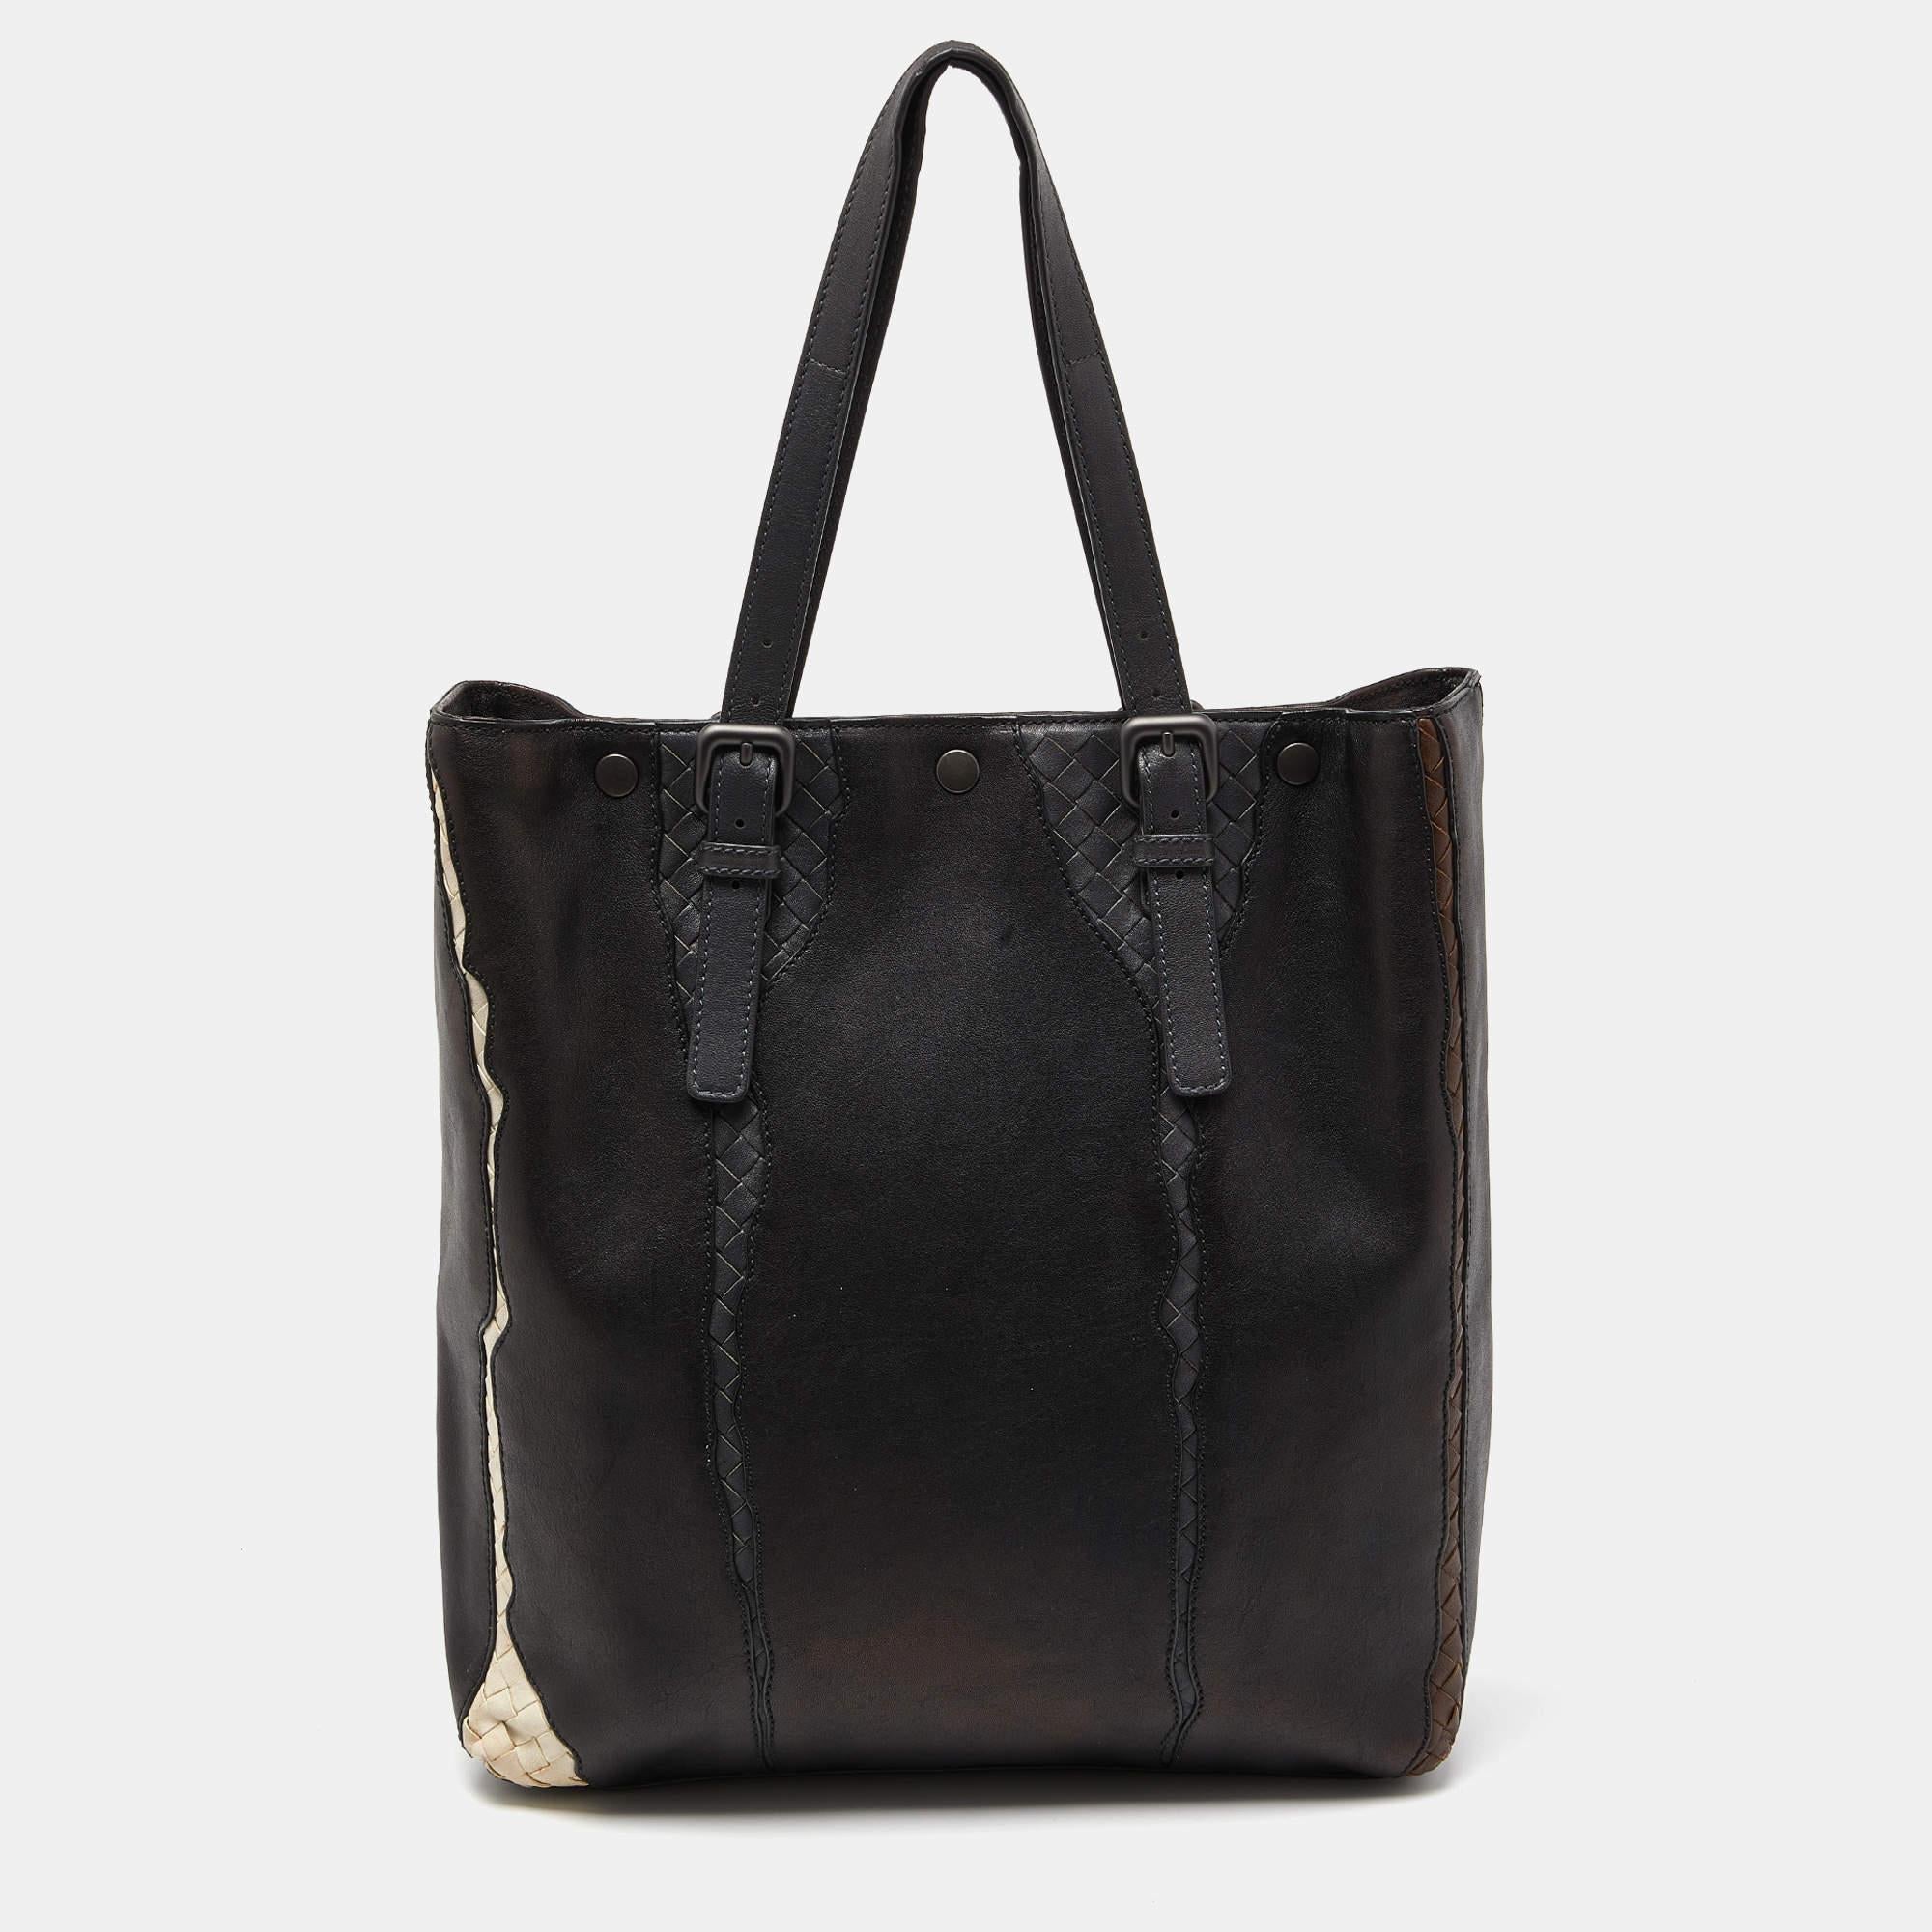 This alluring tote bag for women has been designed to assist you on any day. Convenient to carry and fashionably designed, the tote is cut with skill and sewn into a great shape. It is well-equipped to be a reliable accessory.



